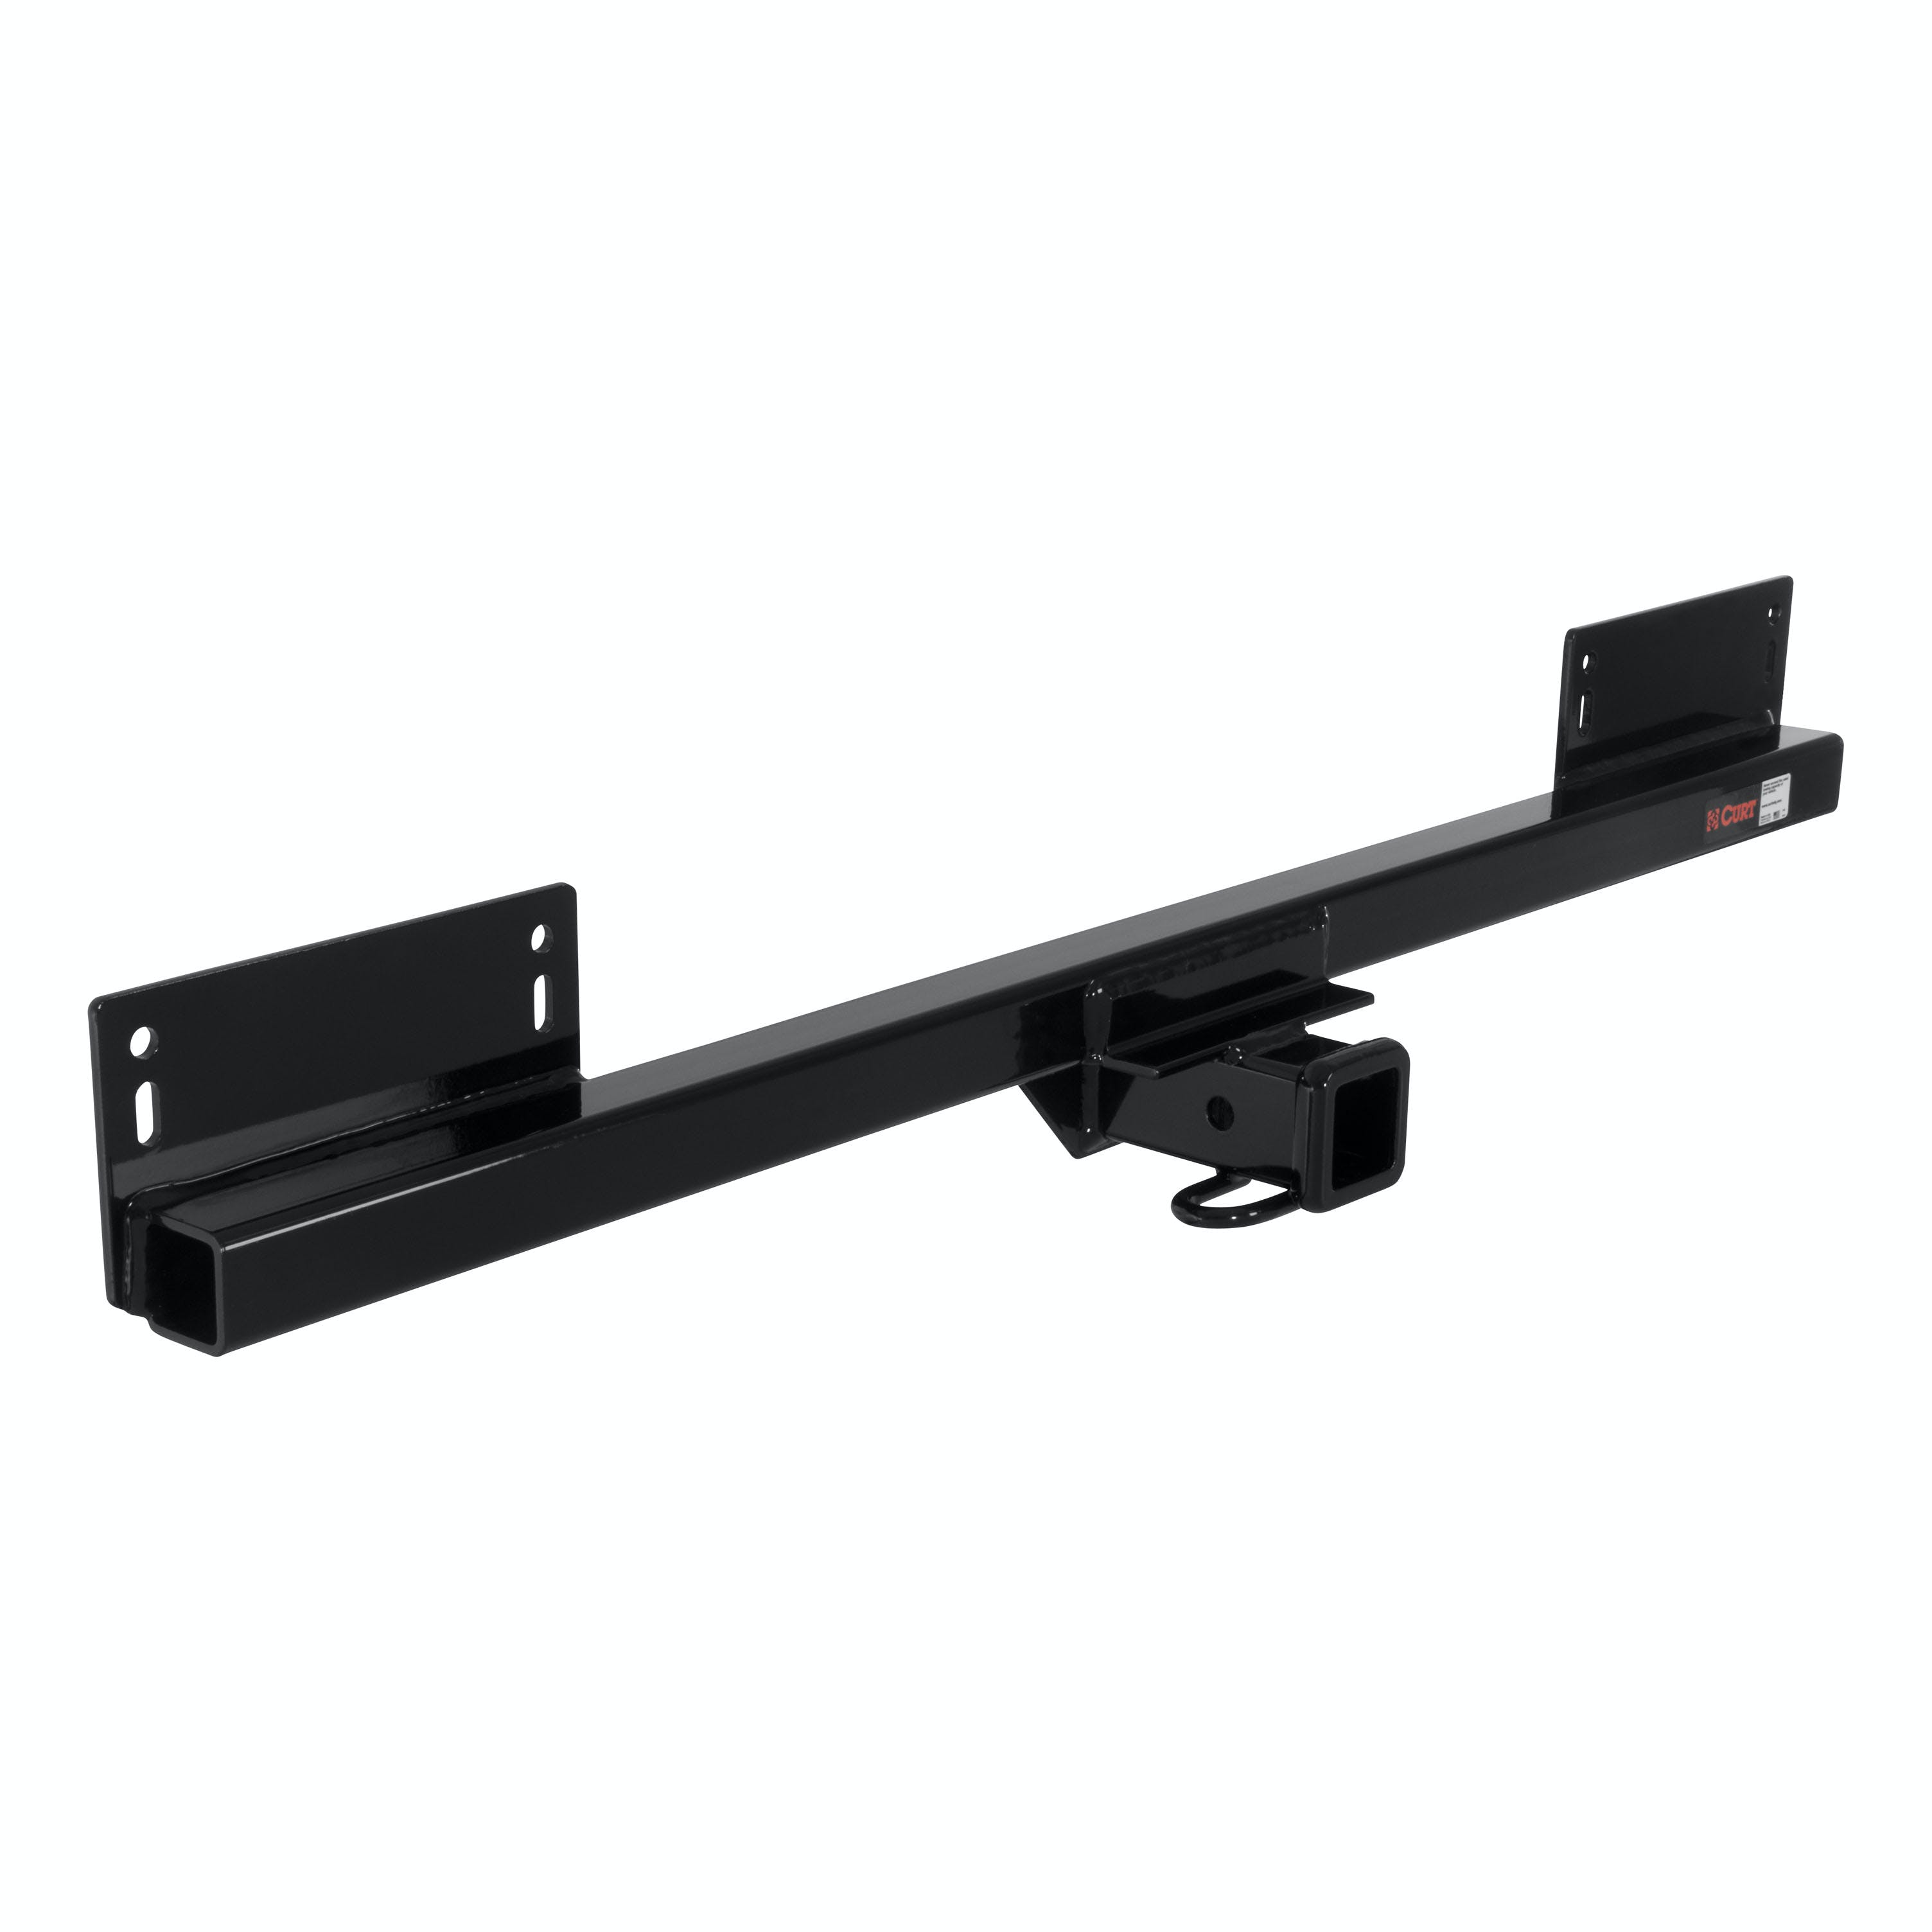 CURT 13657 Class 3 Trailer Hitch, 2 Receiver, Select Jeep Wrangler YJ